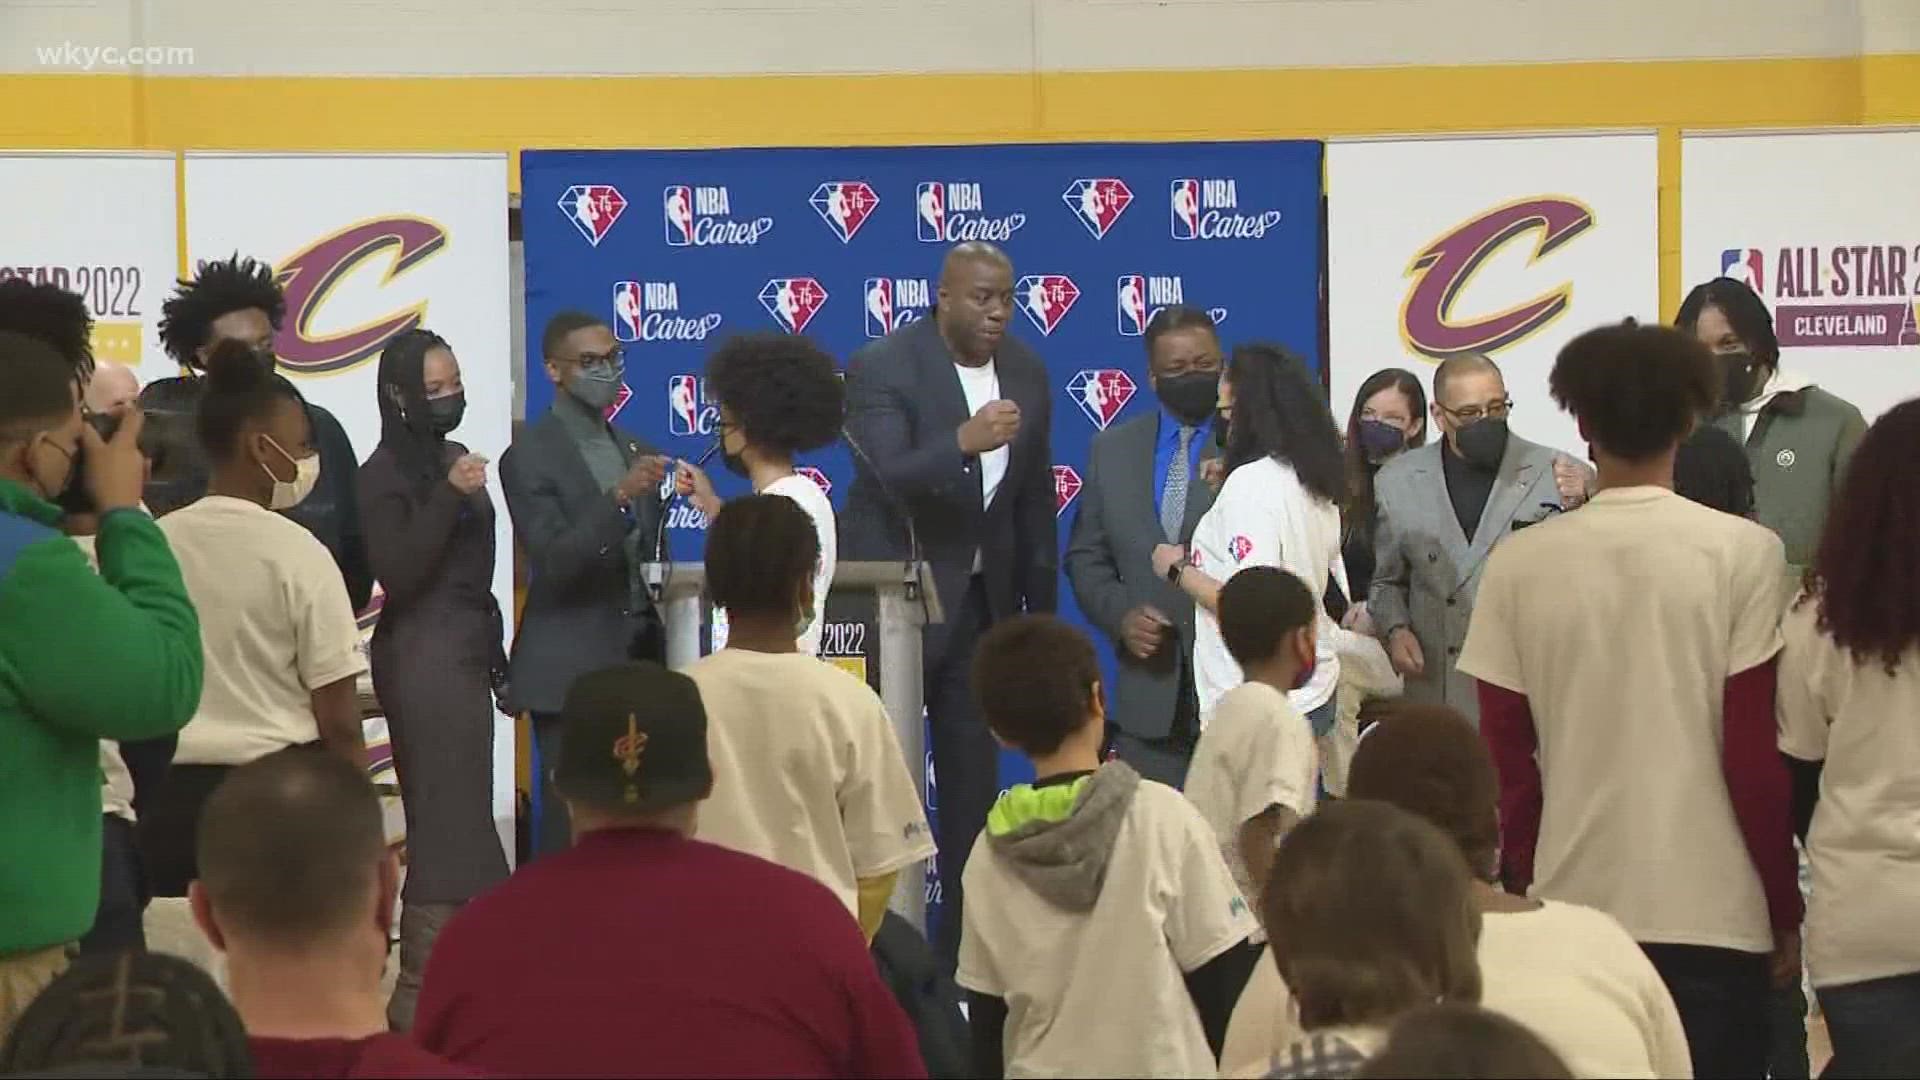 Before the action on the court begins for NBA All-Star Weekend, the league took a moment to give back to the city of Cleveland during a special celebration.